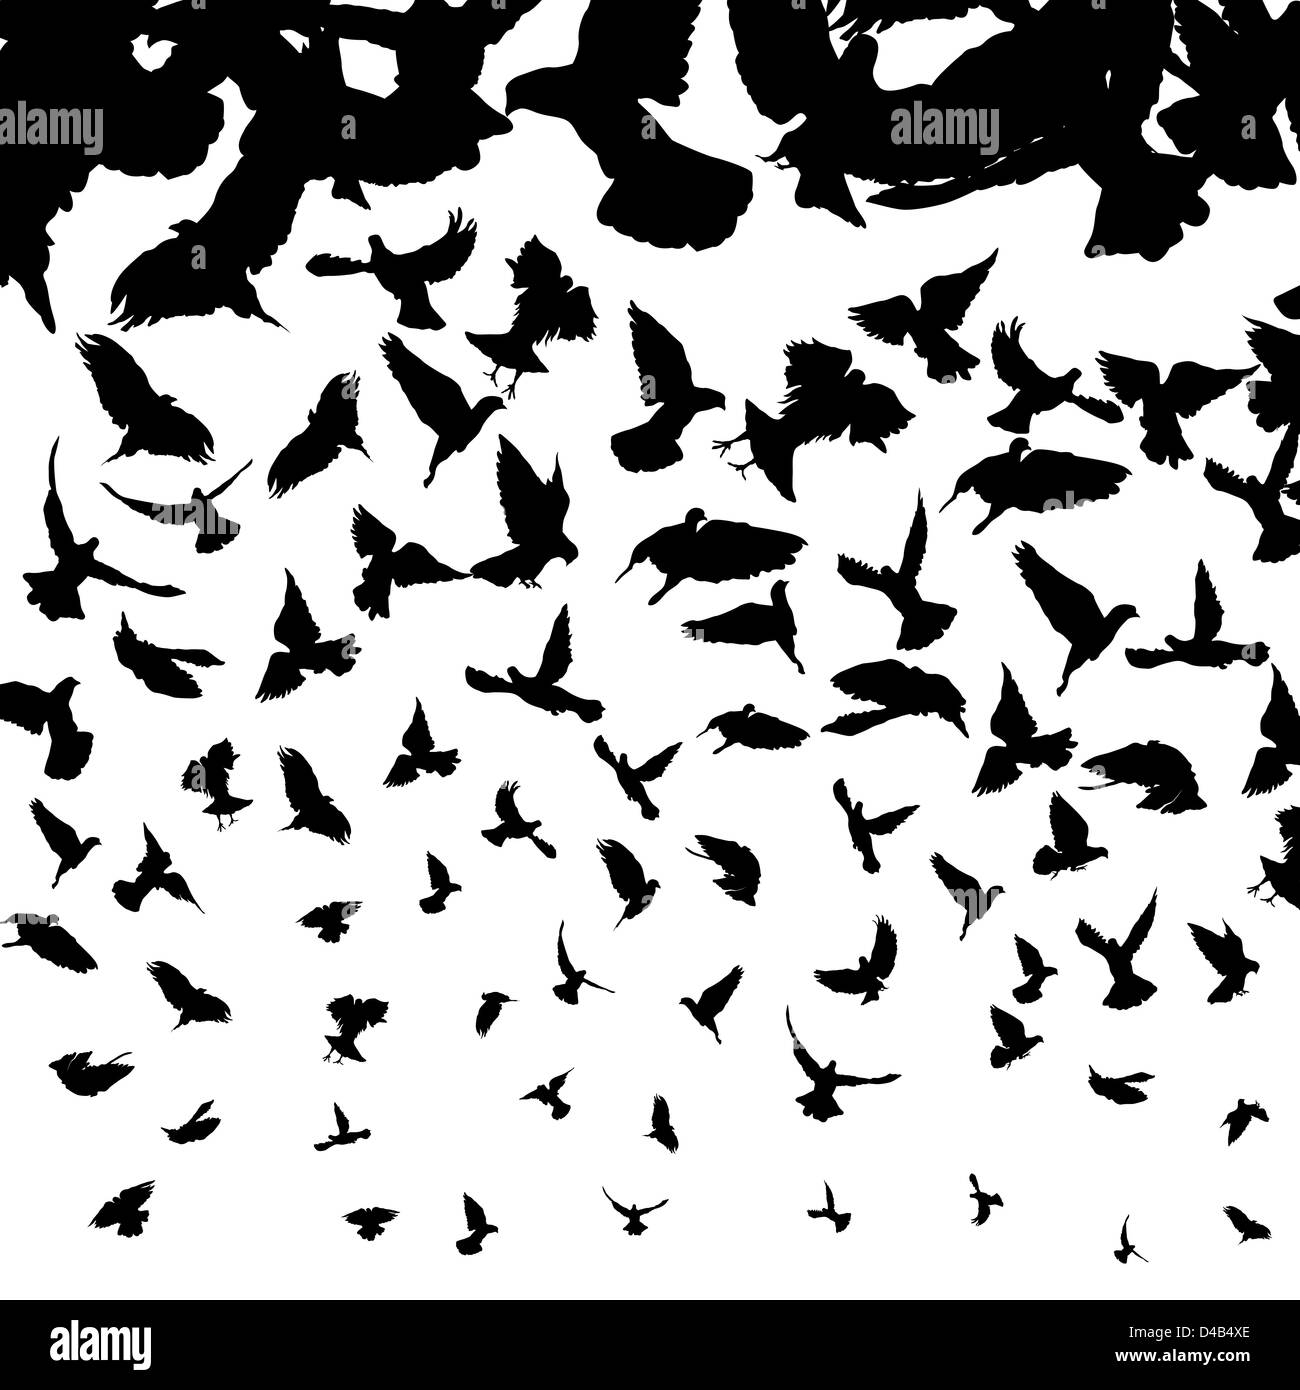 Background illustration with flying bird silhouettes Stock Photo - Alamy